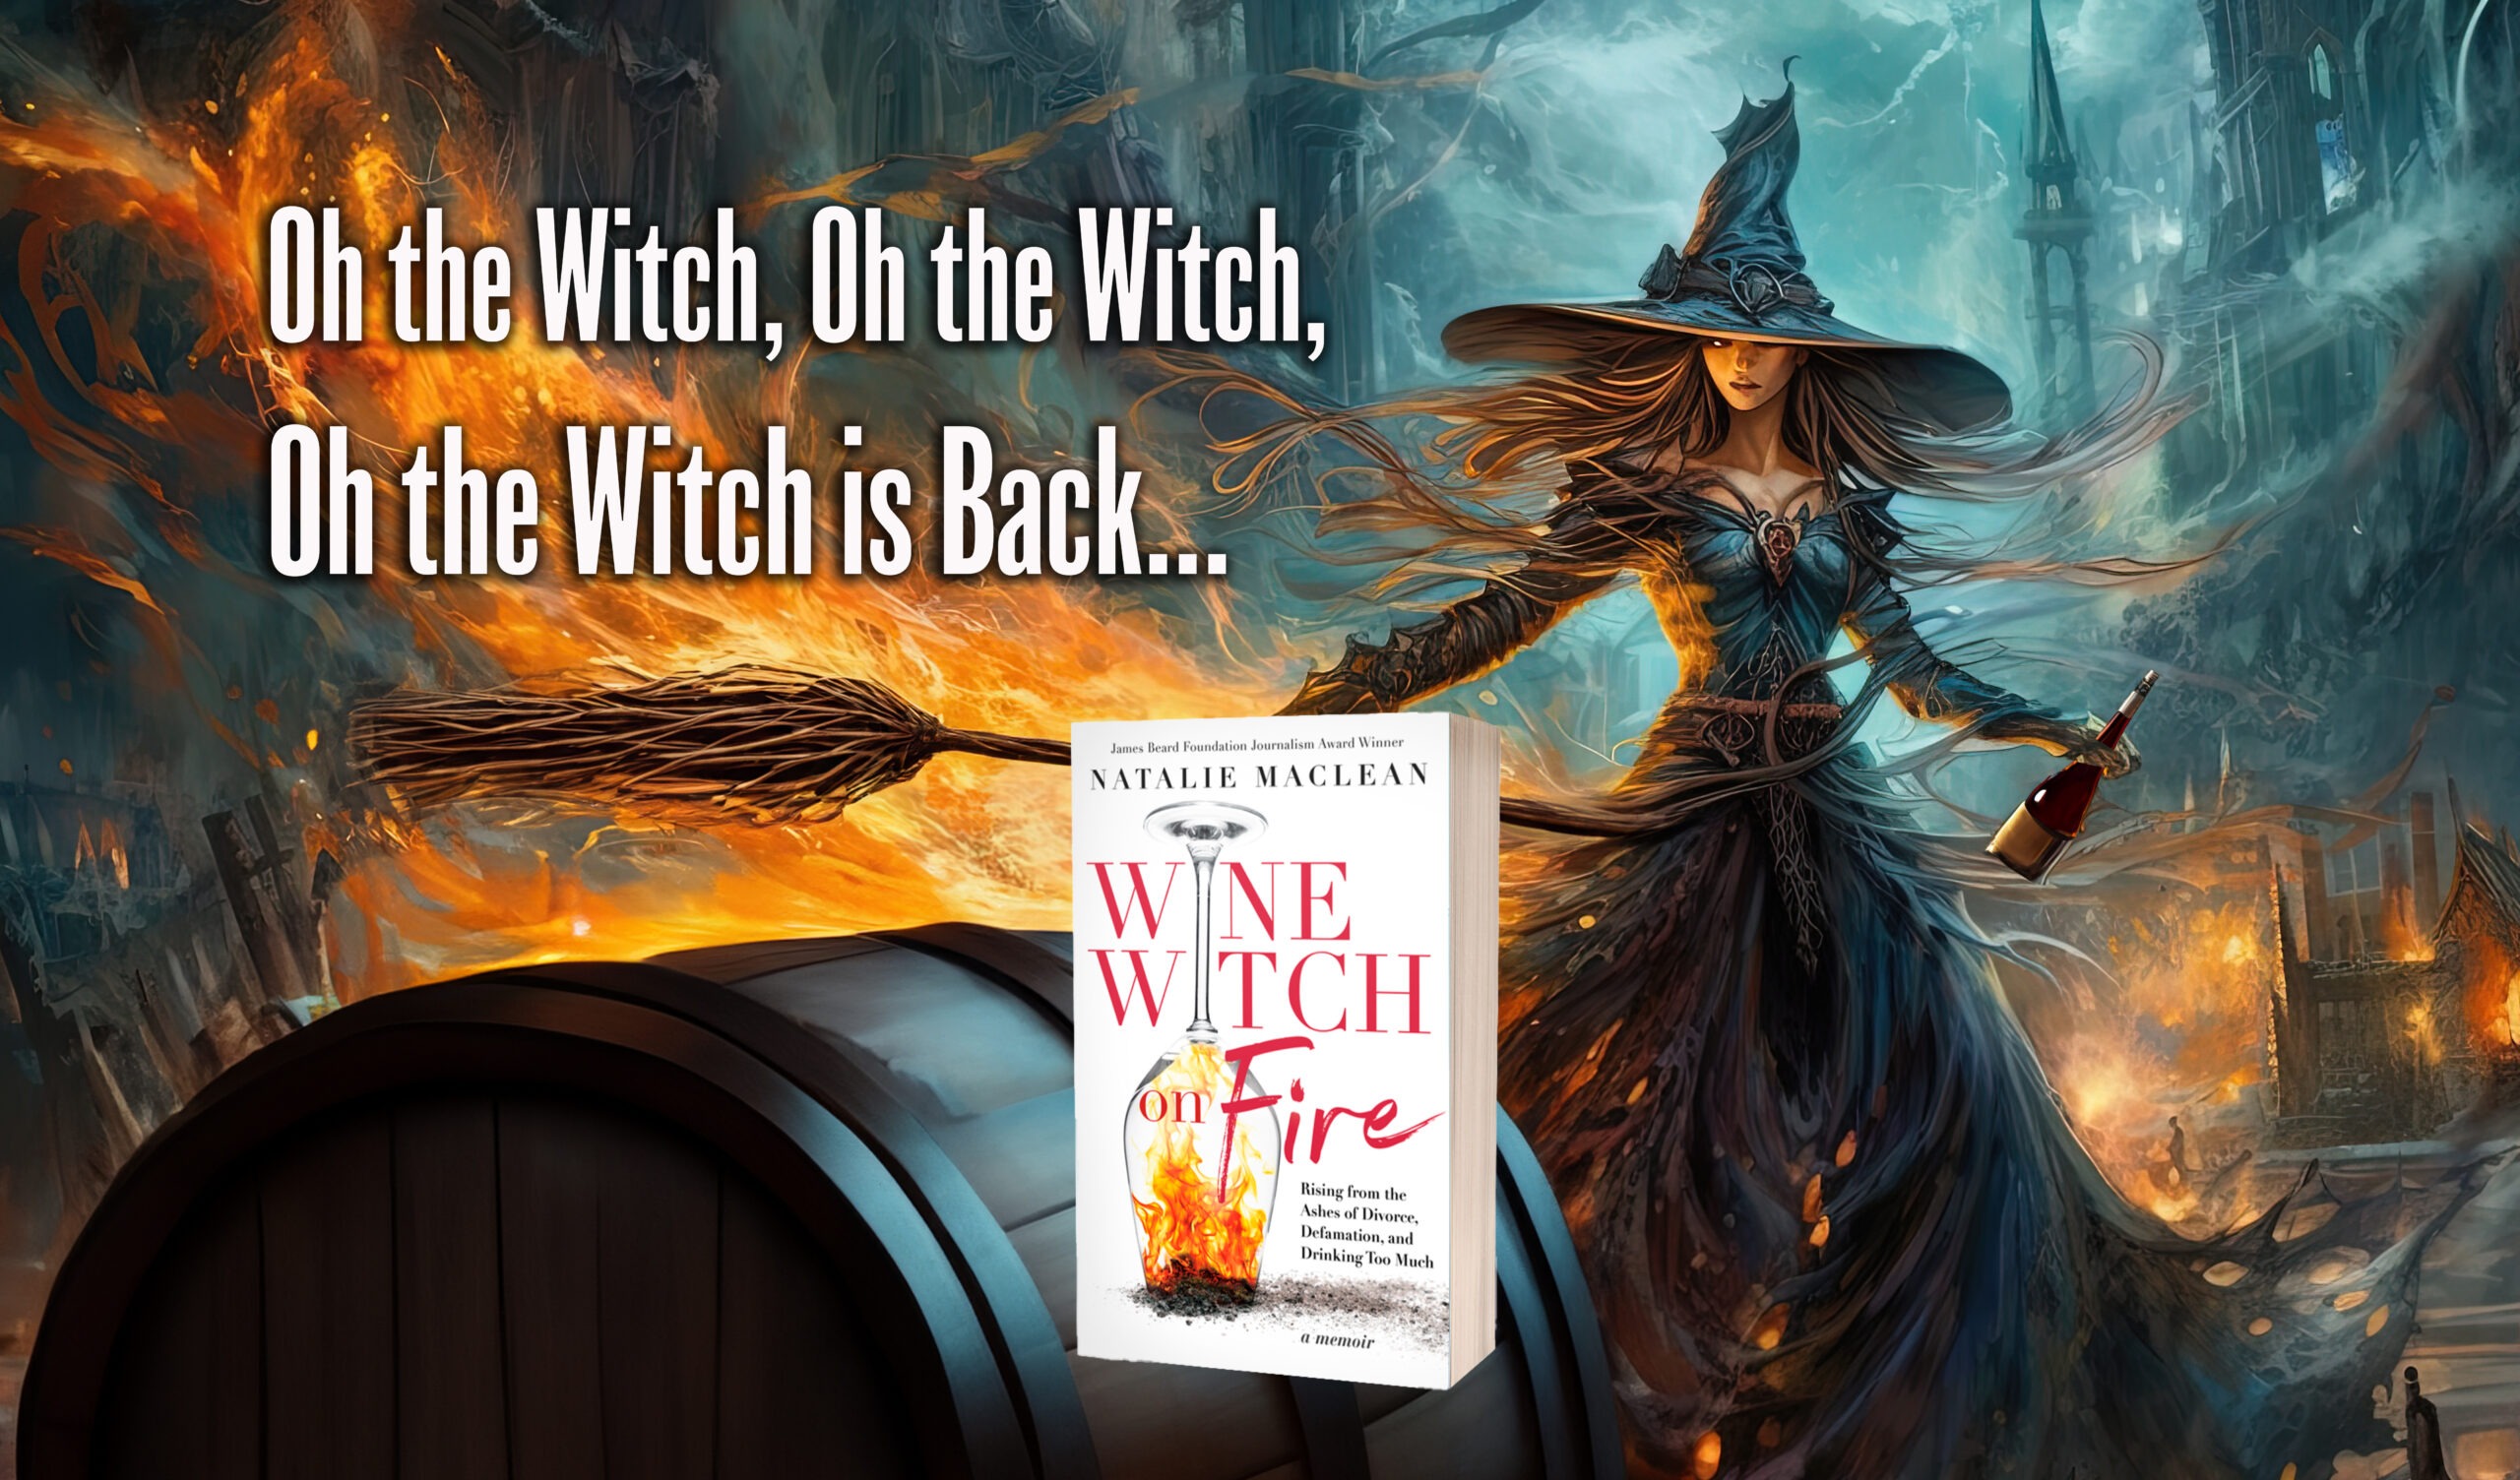 Episode #769 - REIGNITED!  Natalie MacLean's "Wine Witch on Fire" is Most Requested Encore!